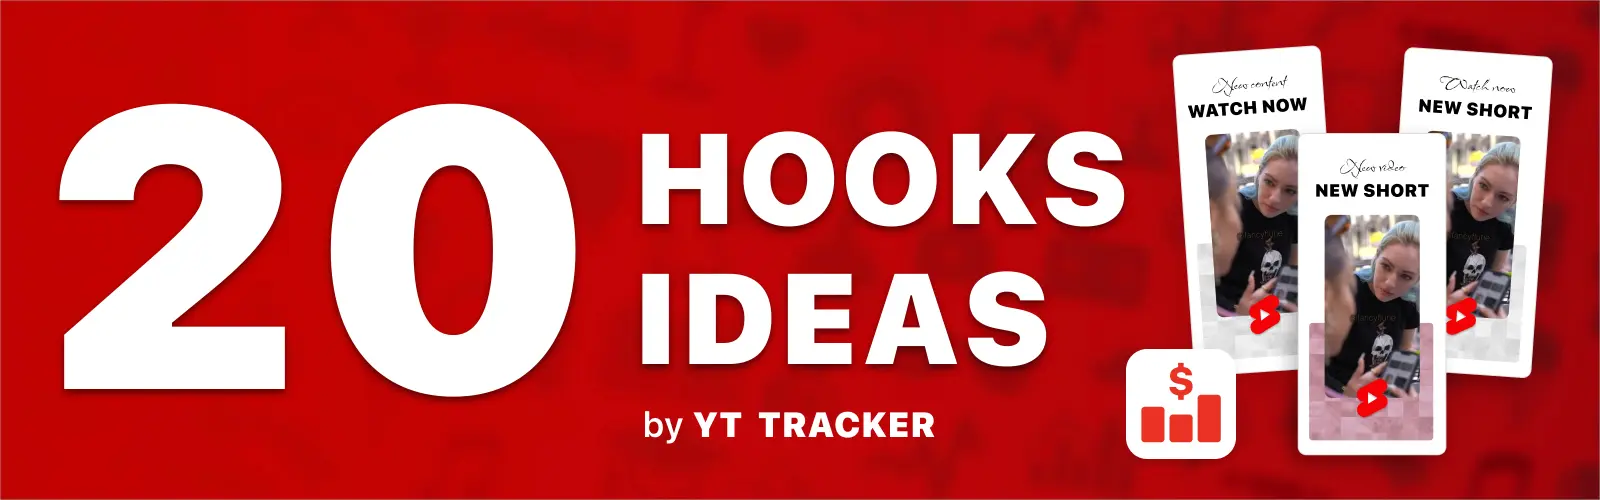 Mastering the Art of YouTube Hooks: 10 Engaging Ideas for Videos and Shorts